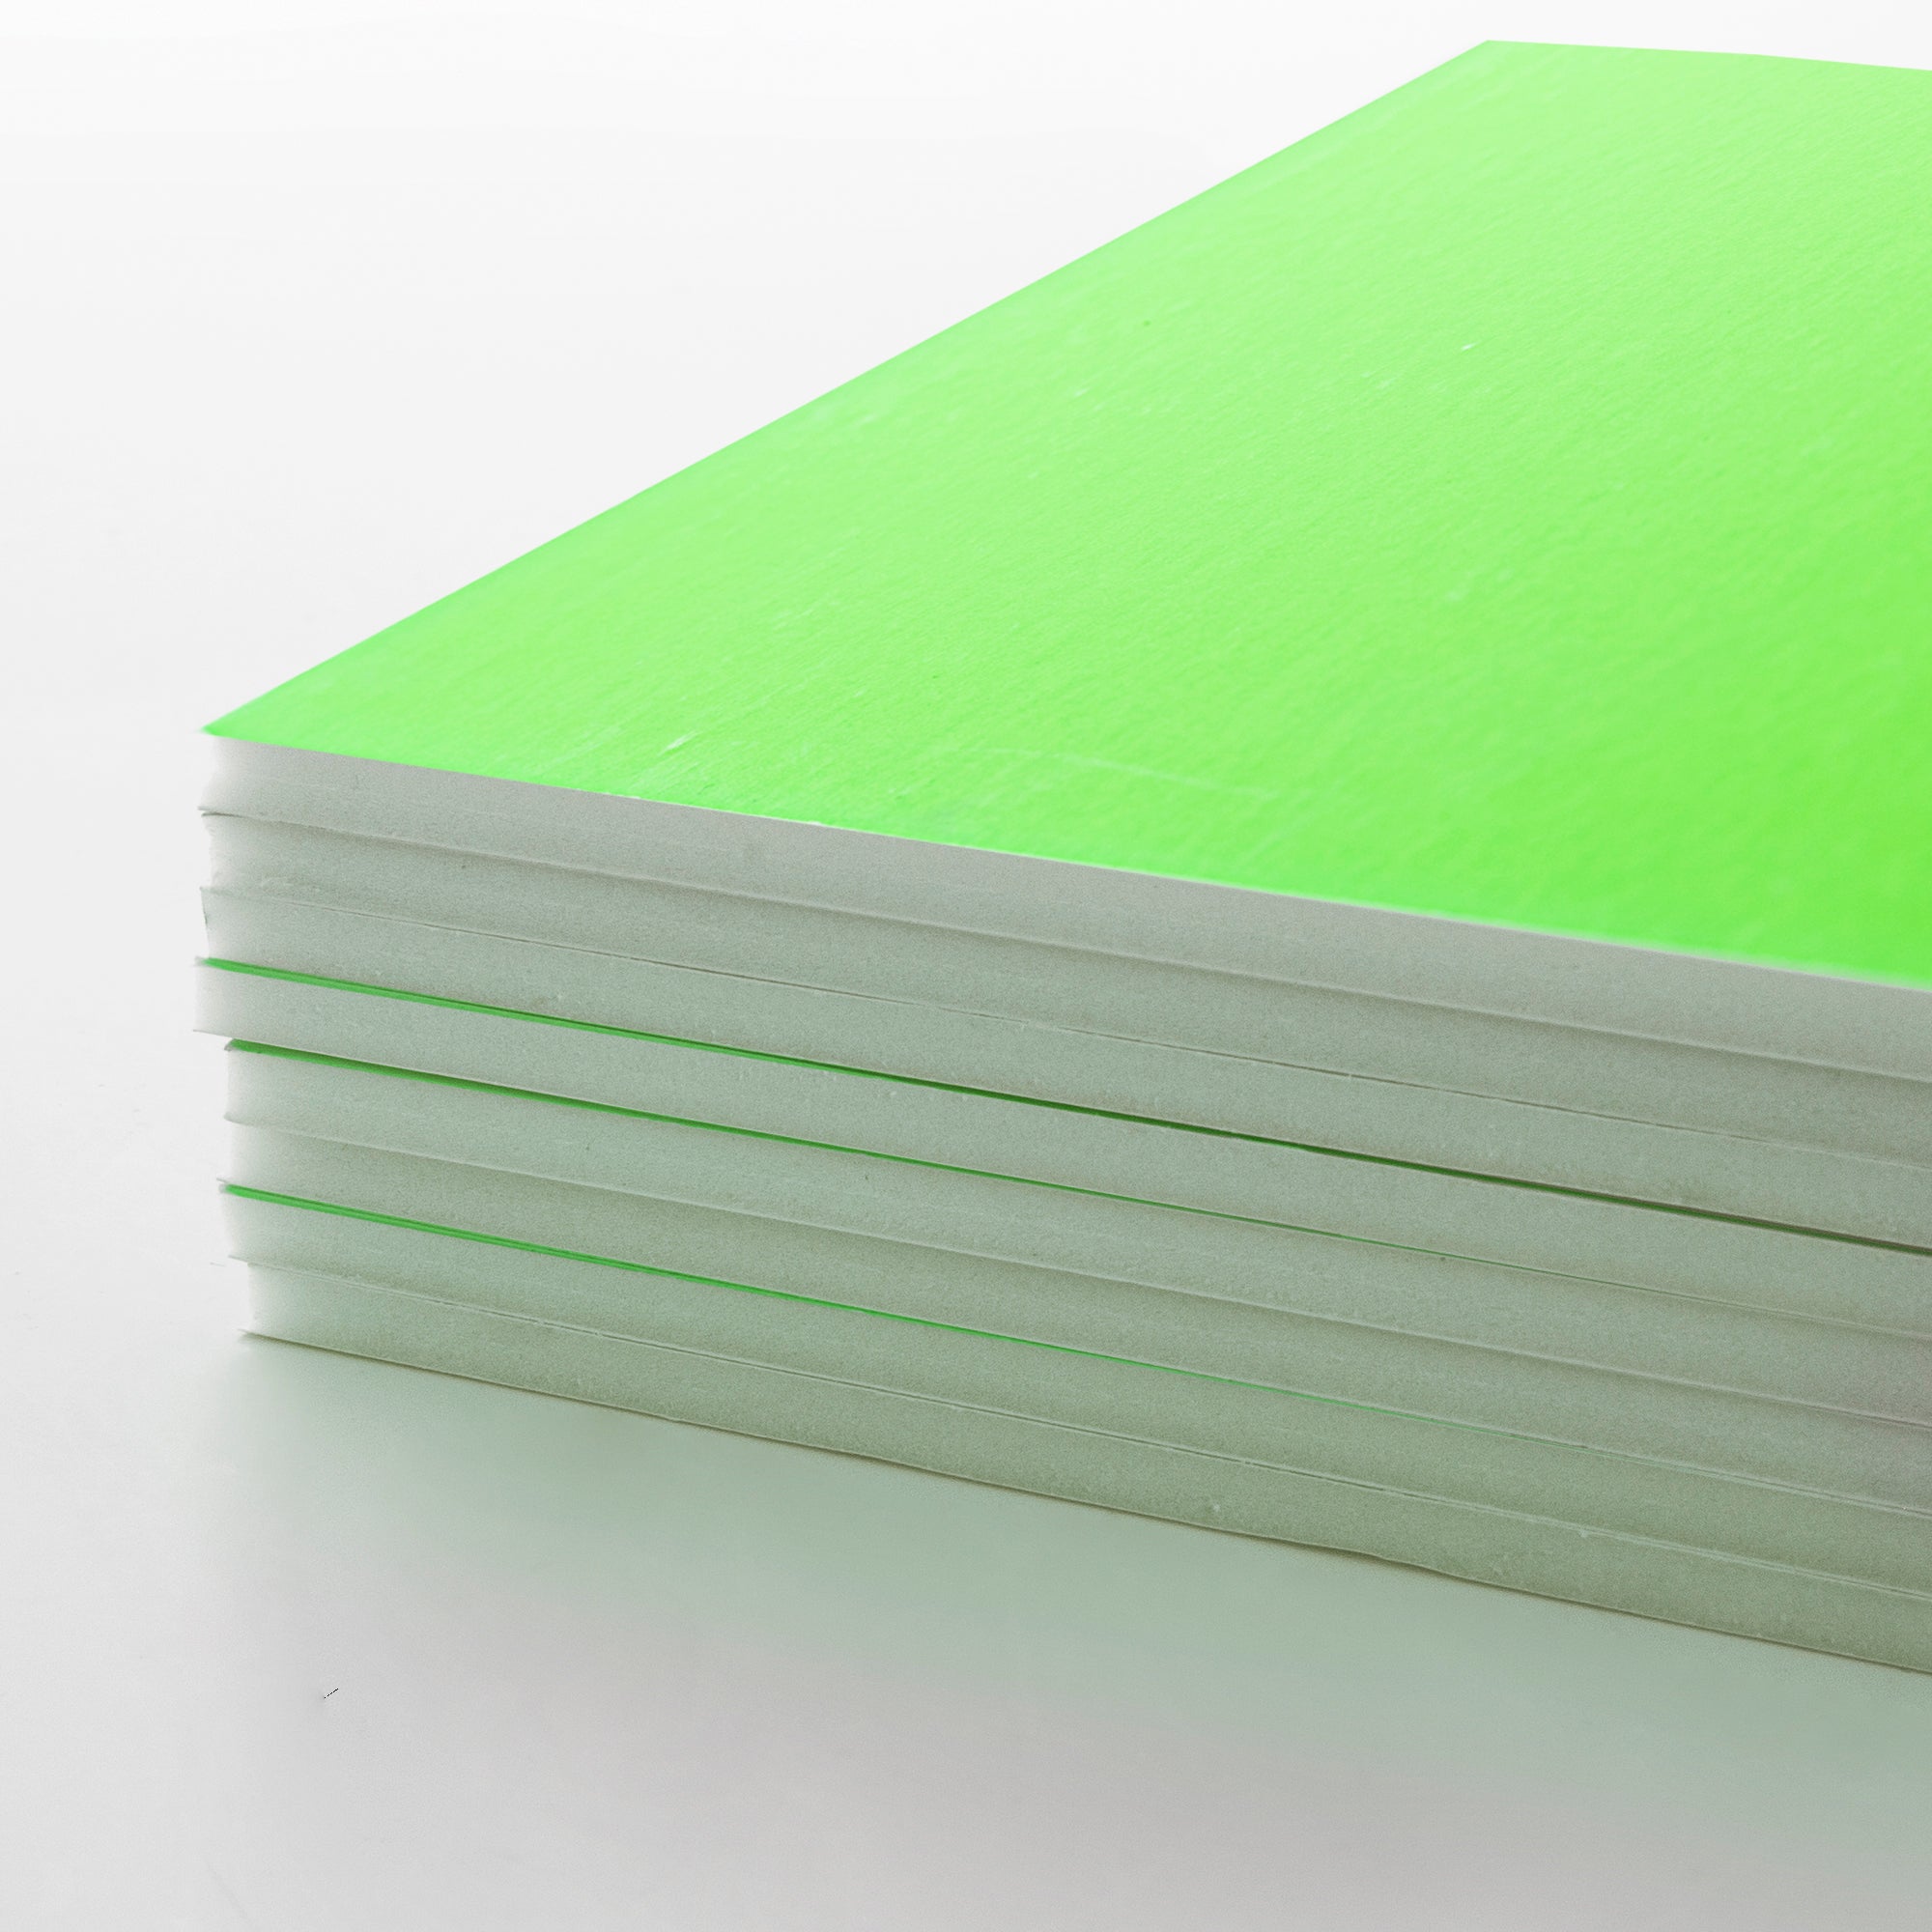 Bazic Products 5400 20 x 30 Fluorescent Green Foam Board - Pack of 25